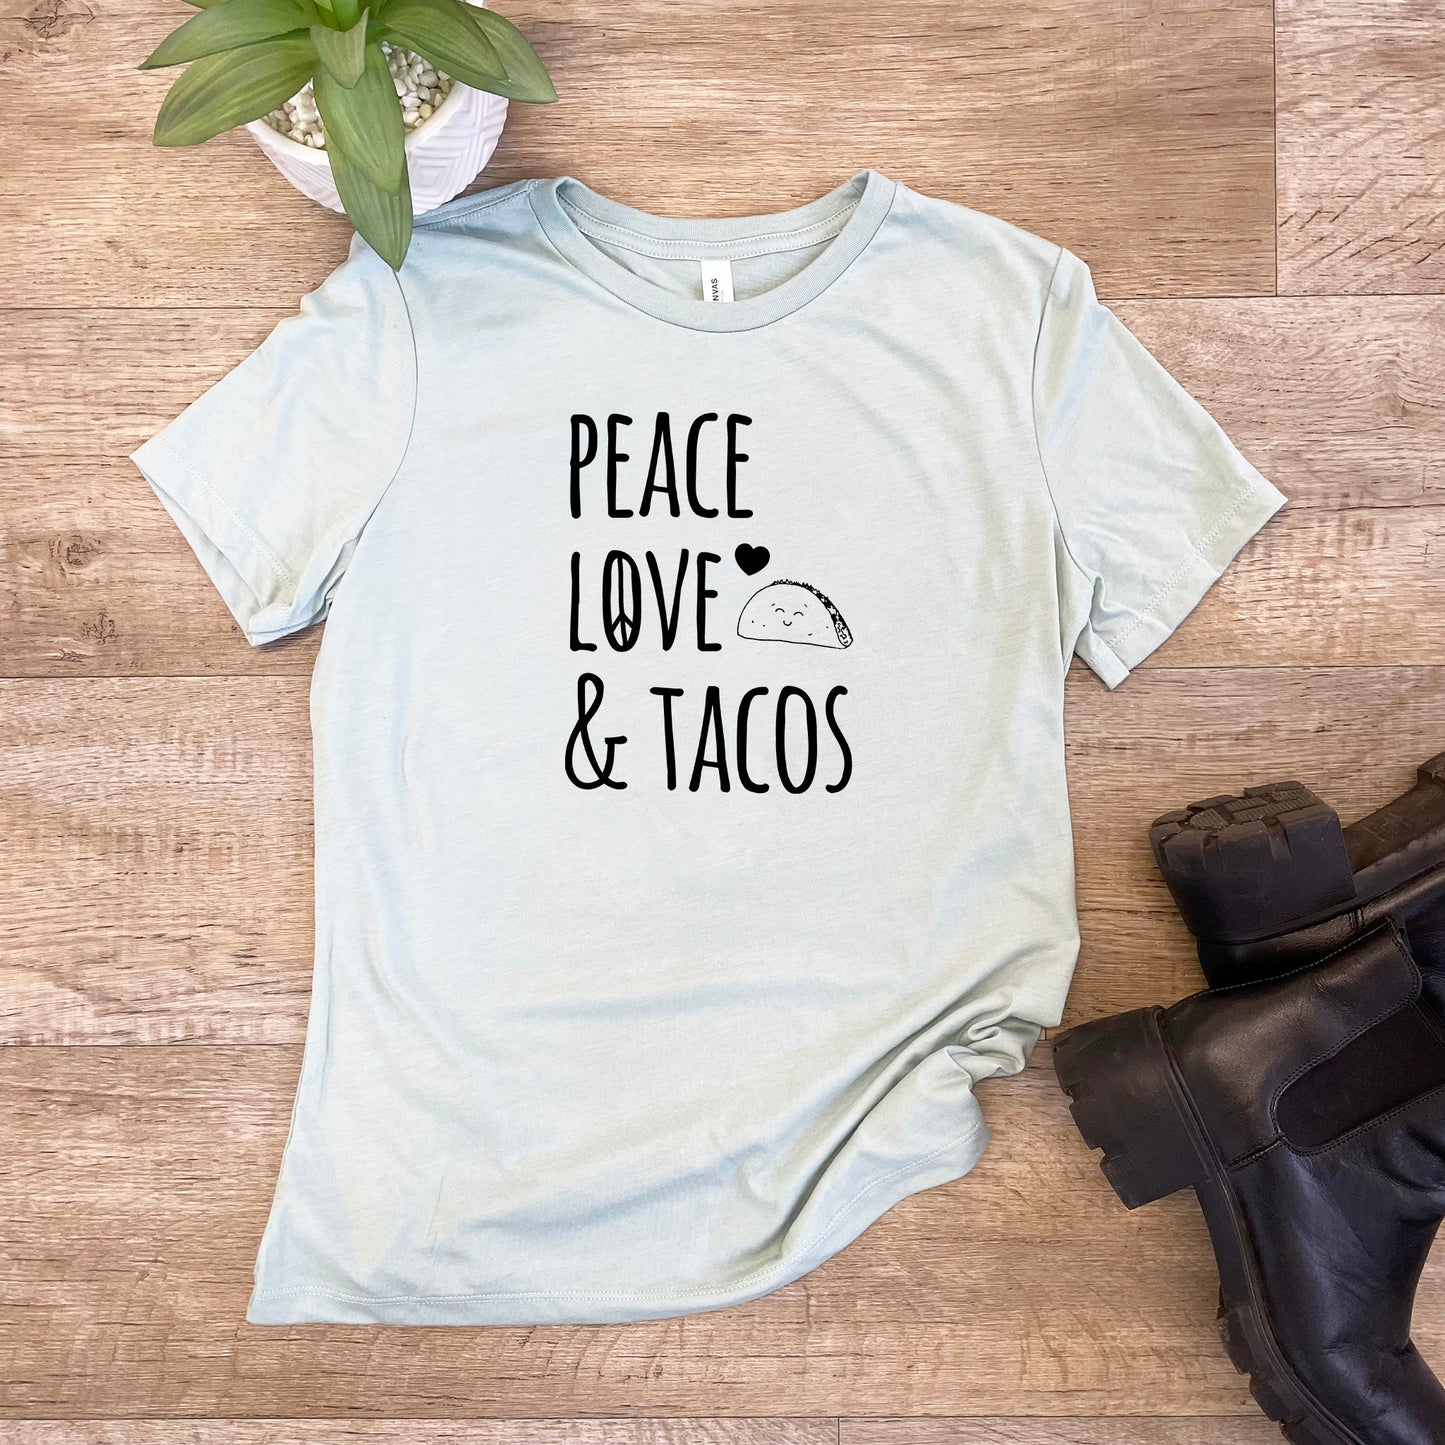 Peace Love & Tacos - Women's Crew Tee - Olive or Dusty Blue